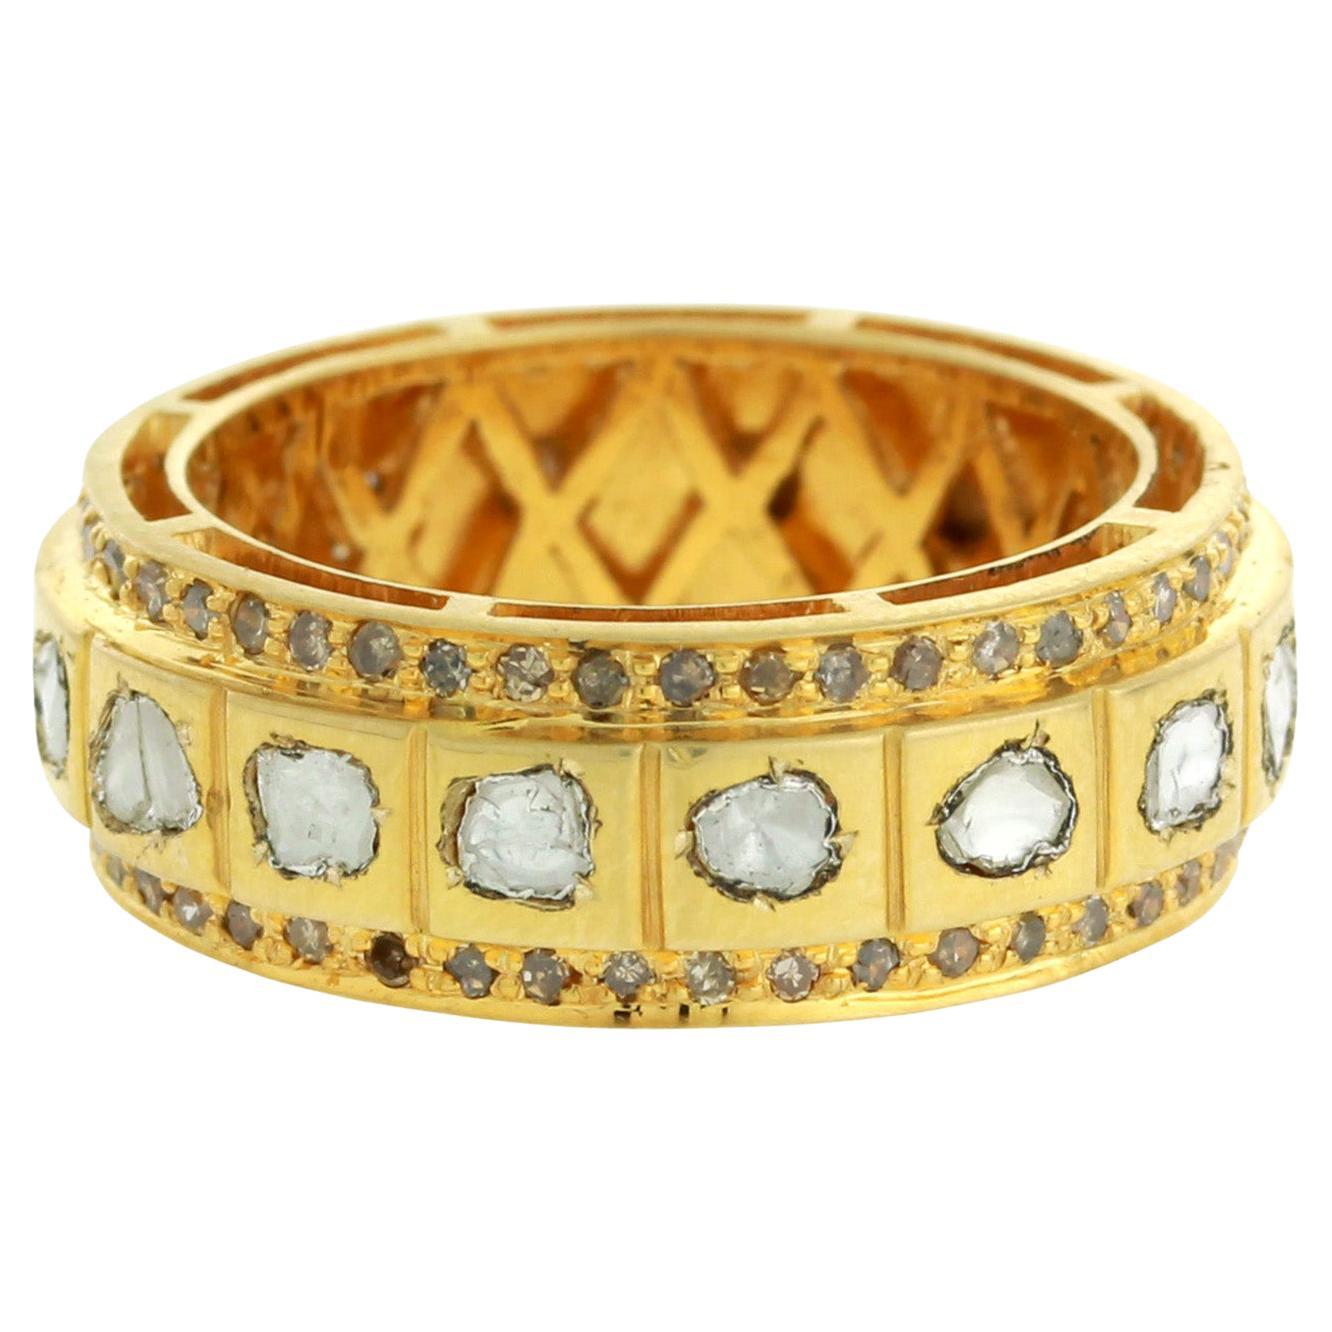 Rosecut Diamond Band Ring With Filigree Work On Interior Made In 18k Yellow Gold